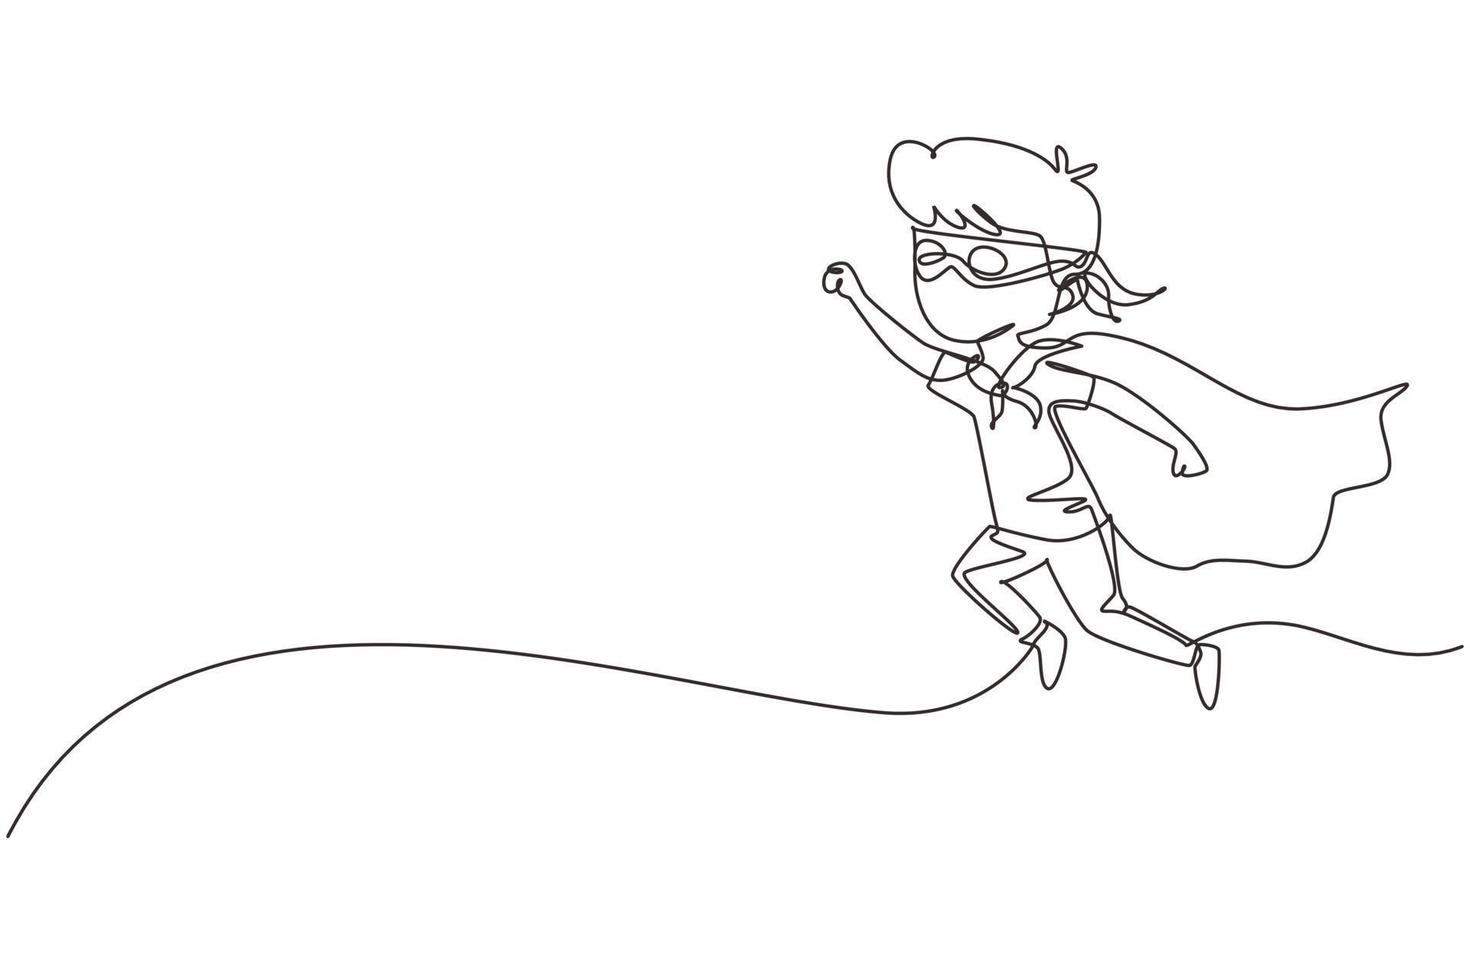 Single continuous line drawing boy flies through air in super hero pose with outstretched hand. Kid in super hero costume with mask on his face and cloak tied around neck. One line draw graphic design vector